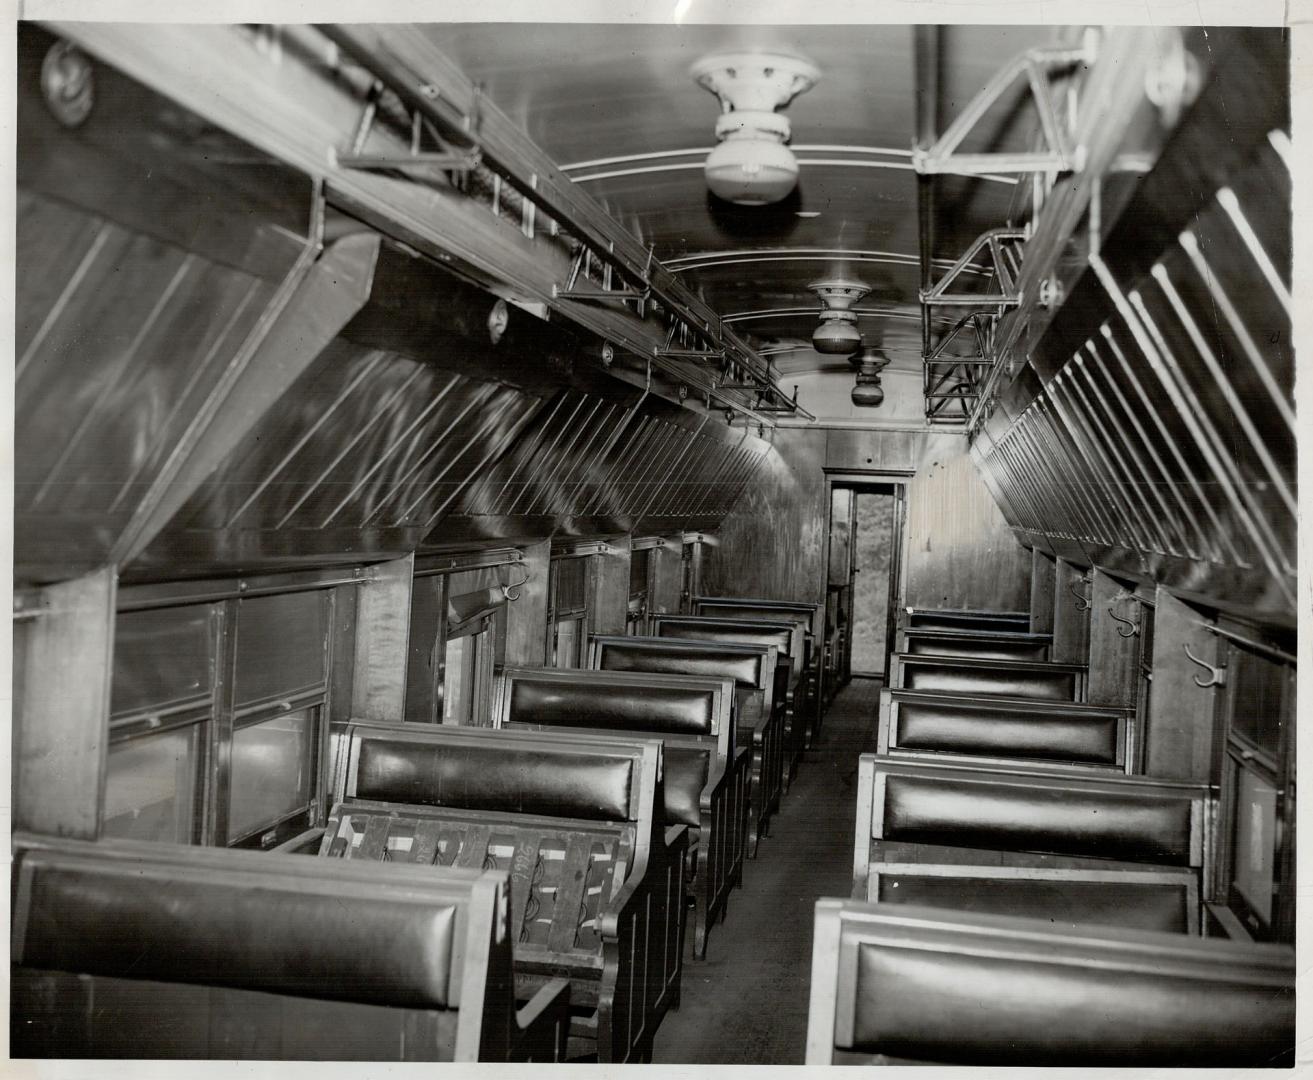 Shortage of steel cars is believed to have kept board of transport commissioners from rescinding permission granted during war. Coaches are gas-lit li(...)